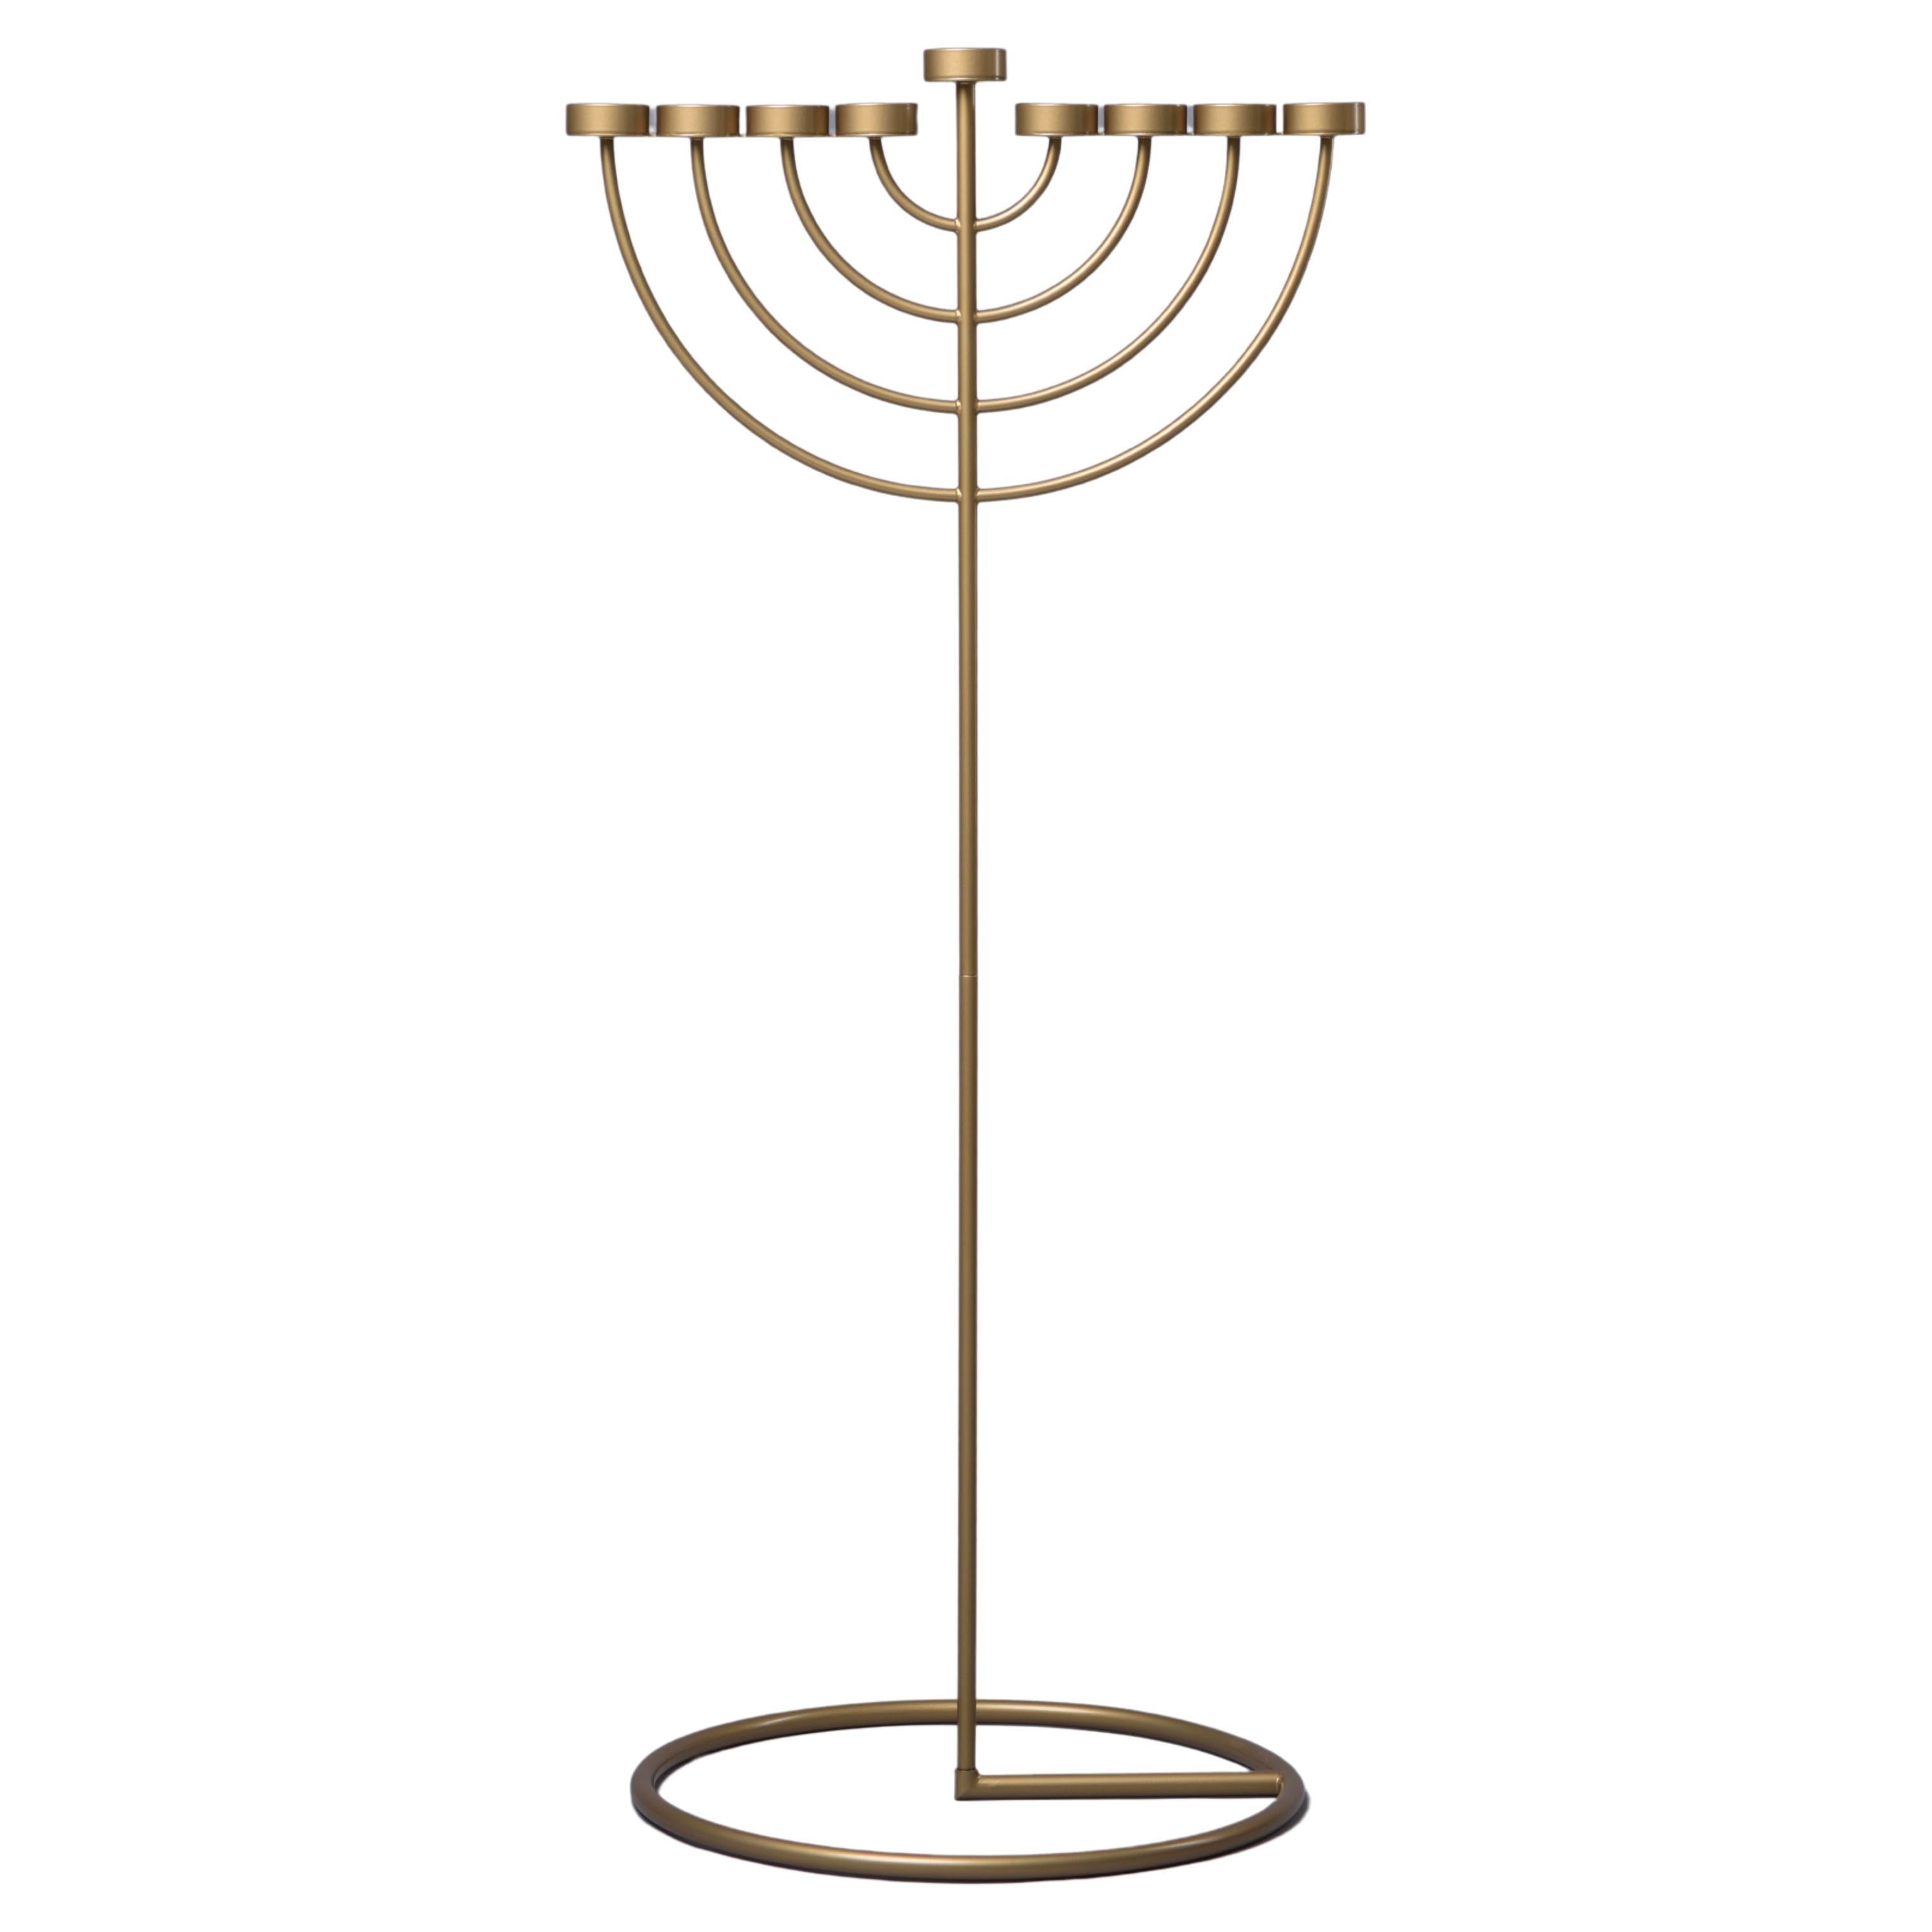 RADIUS Menorah, floor standing candleholders (130cm) by oitoproducts For Sale